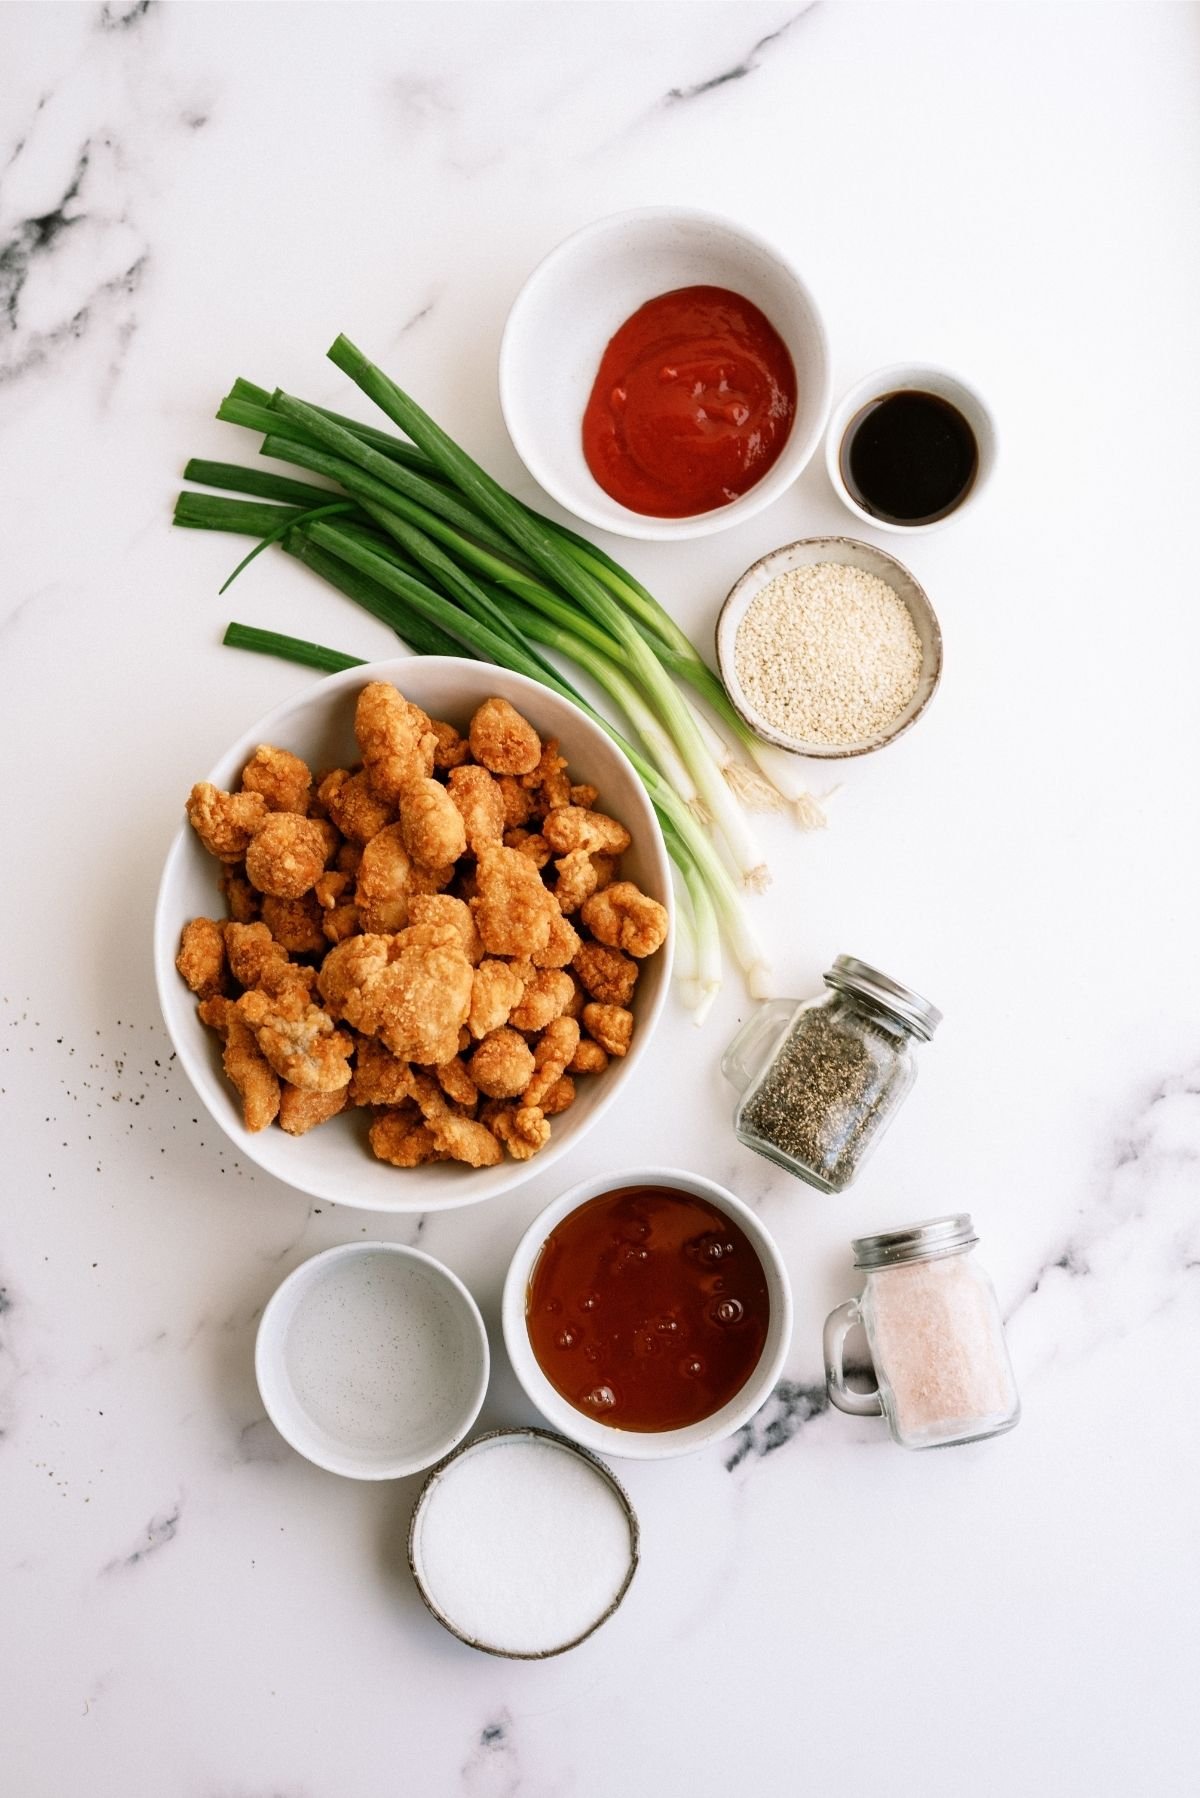 Ingredients for Instant Pot Sticky Chicken